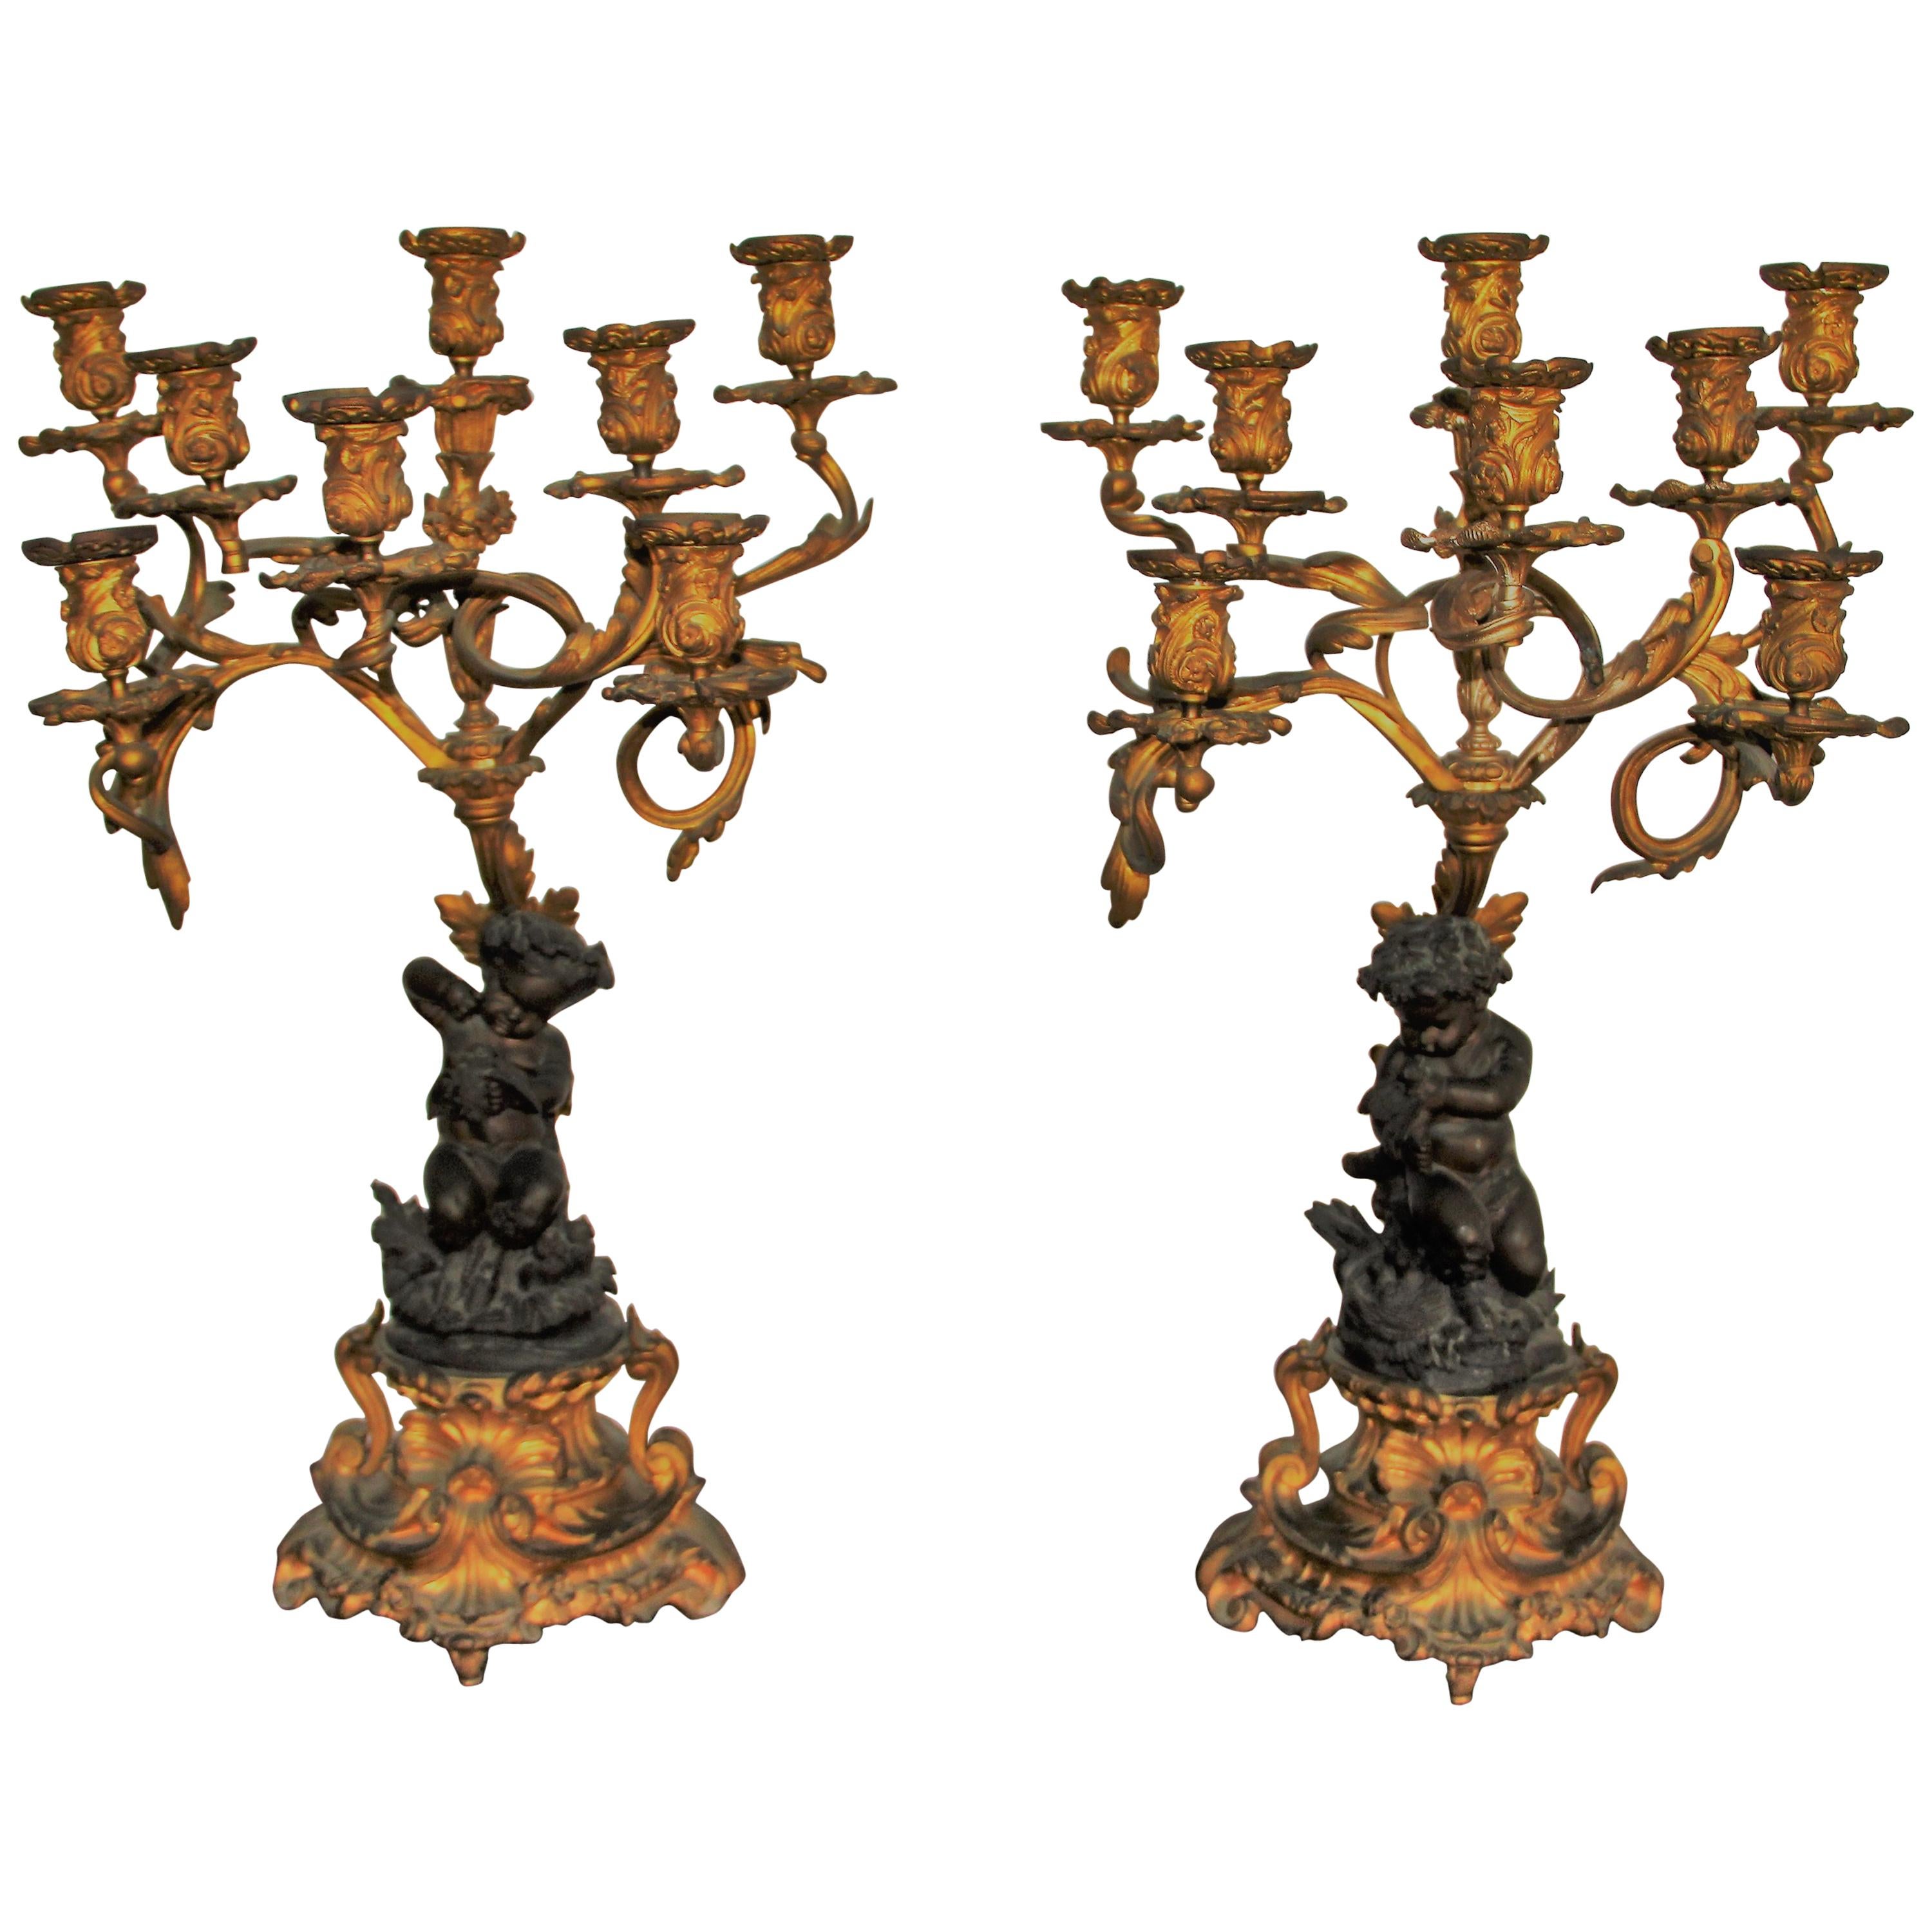 Pair of Bronze and Gilt-Bronze Candelabra Louis XV Style, Mid-19th Century For Sale